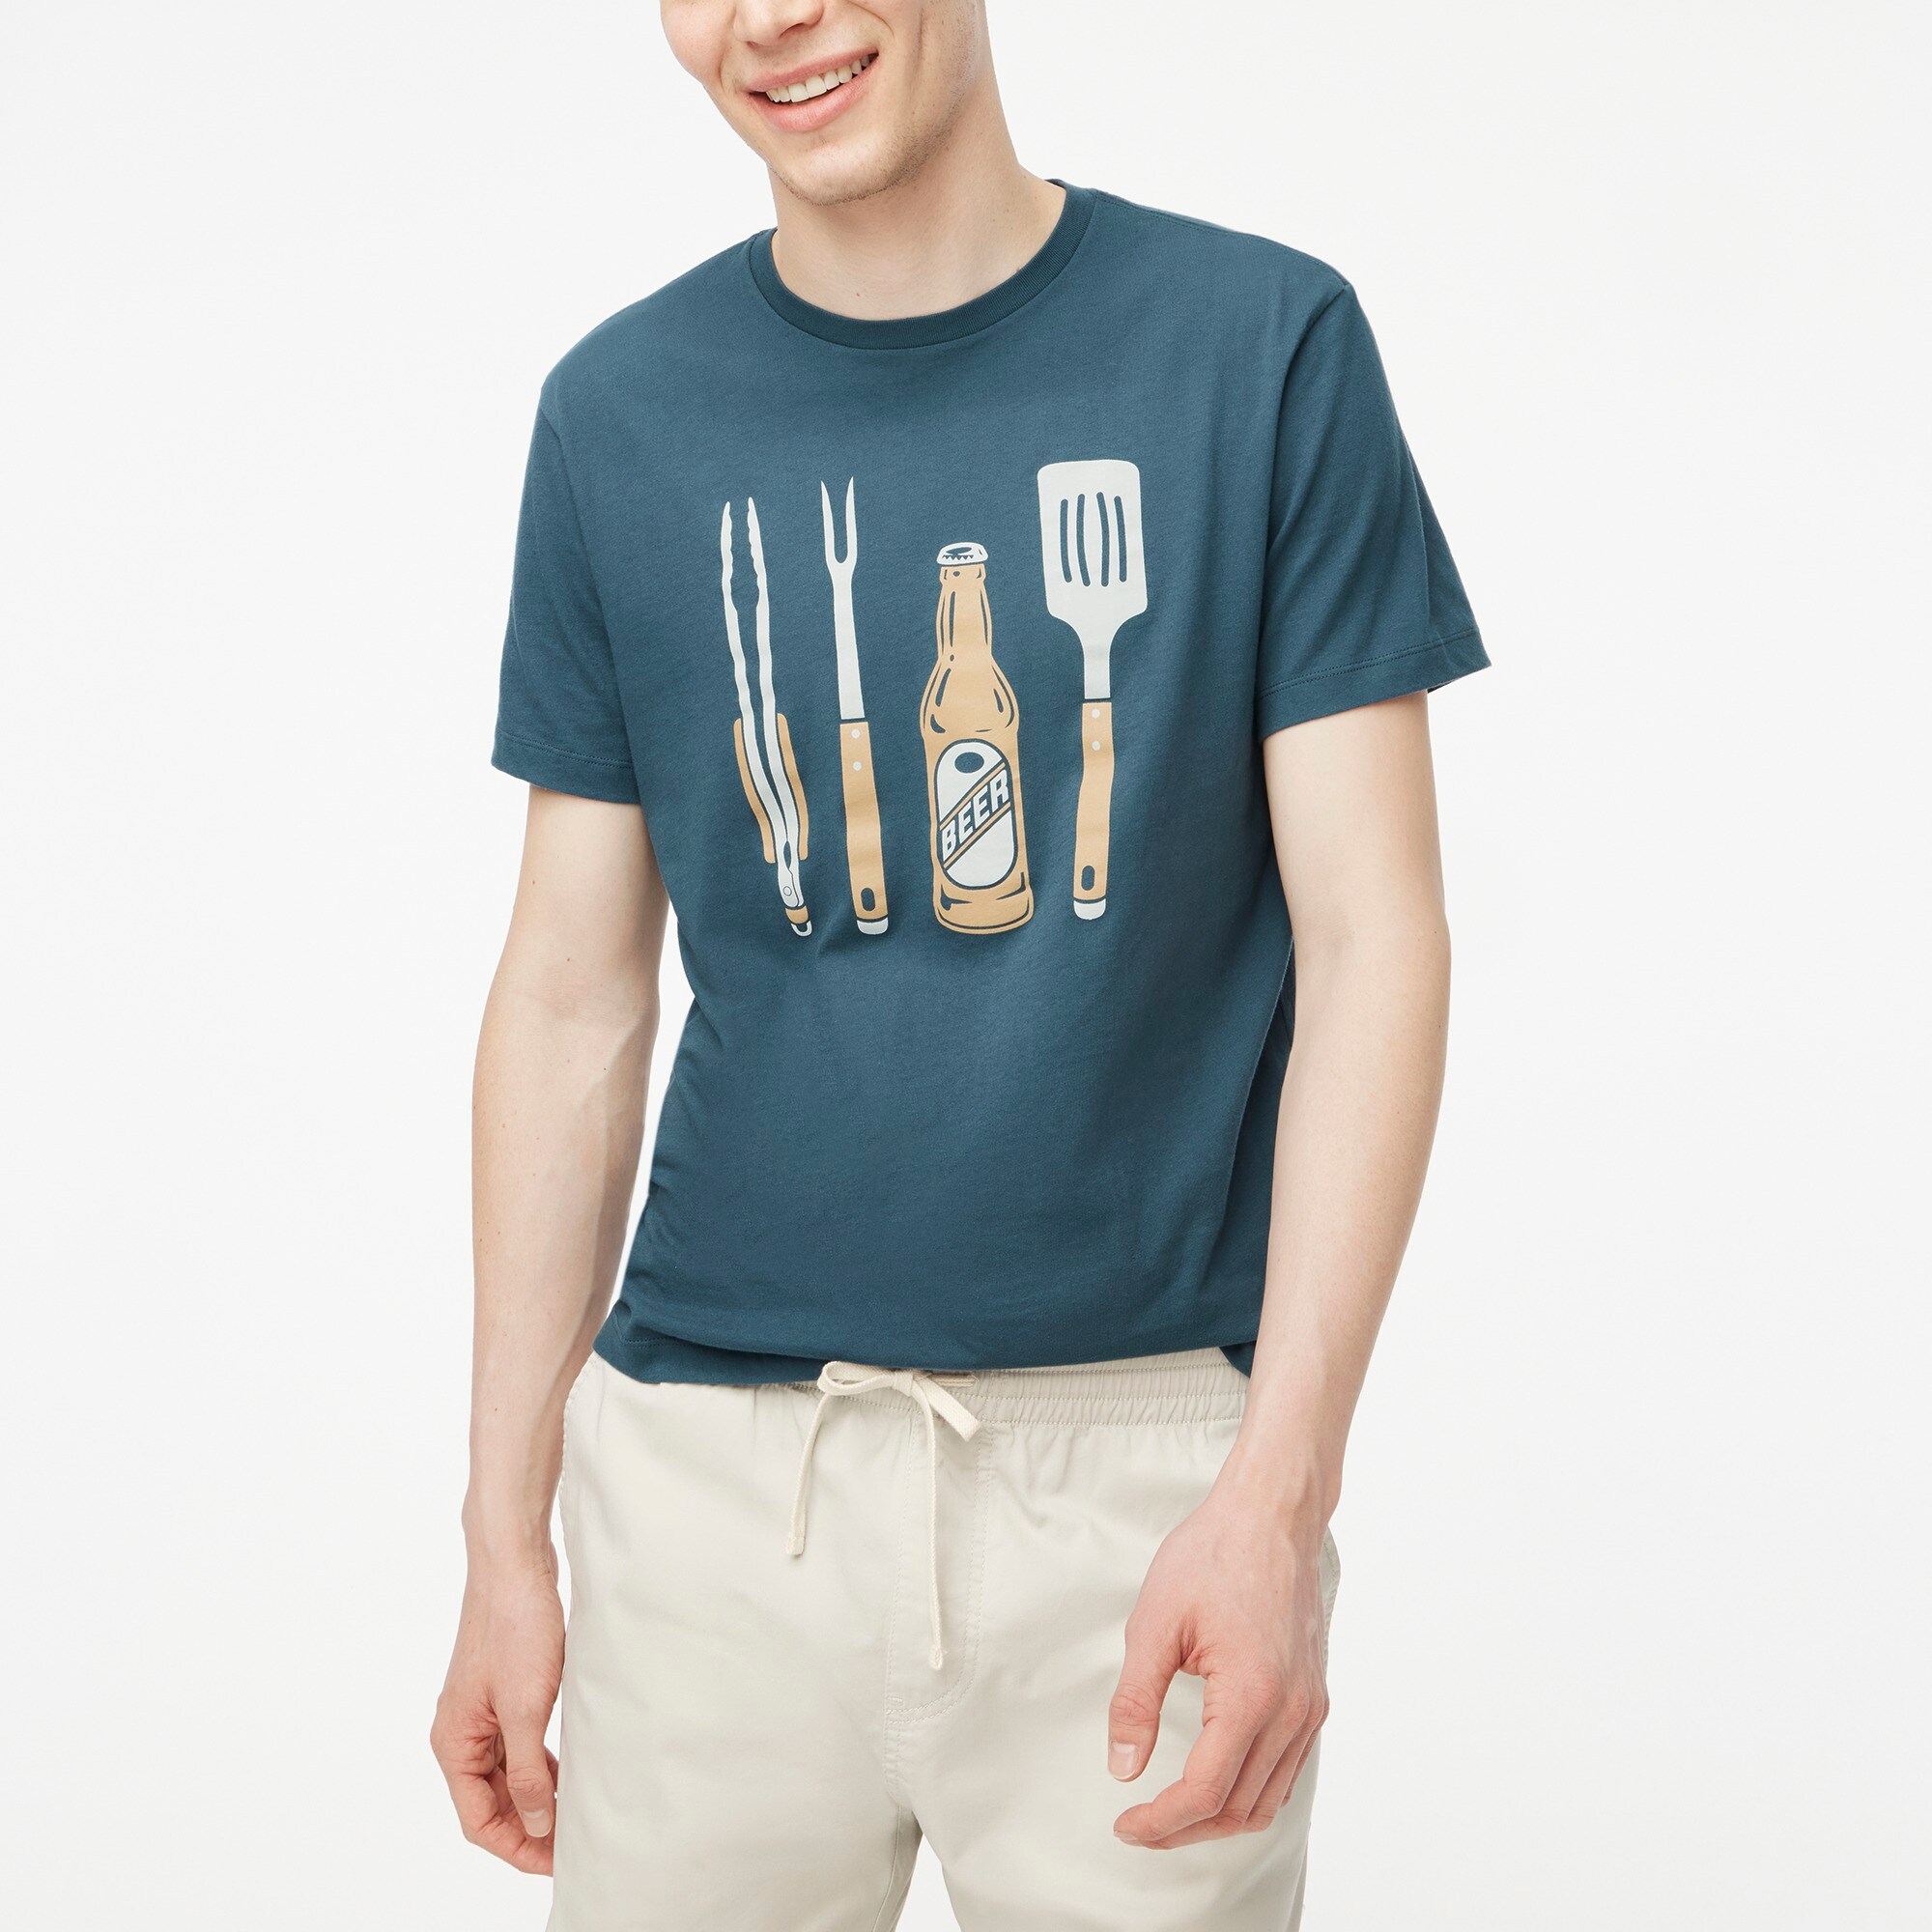  Grill tools graphic tee